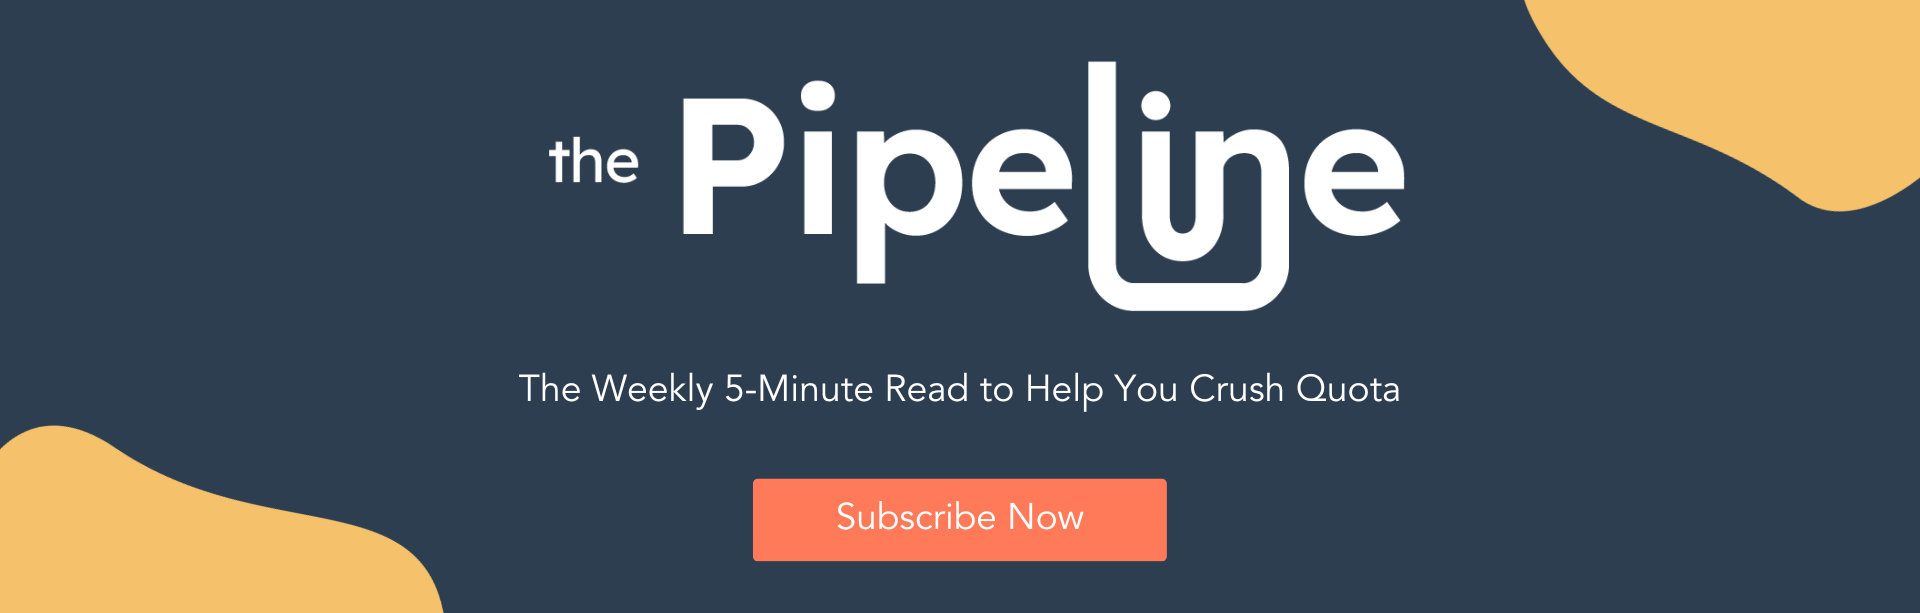 Subscribe to "The Pipeline" — The Weekly 5-Minute Read to Help You Crush Quota 